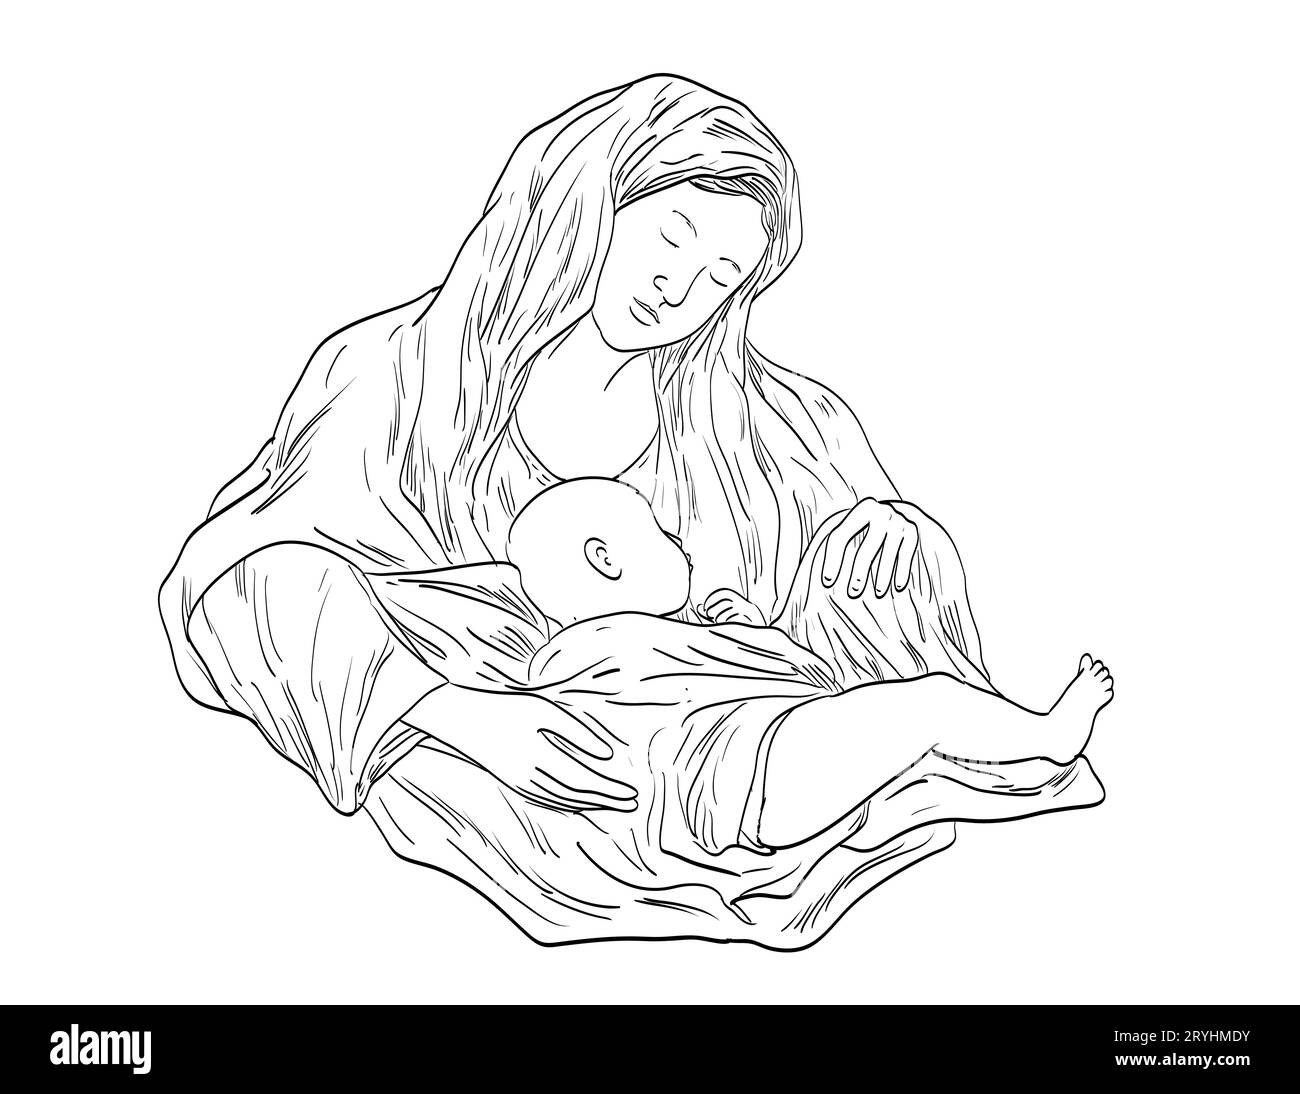 Madonna and the Baby Child Jesus Medieval Style Line Art Drawing Stock Photo